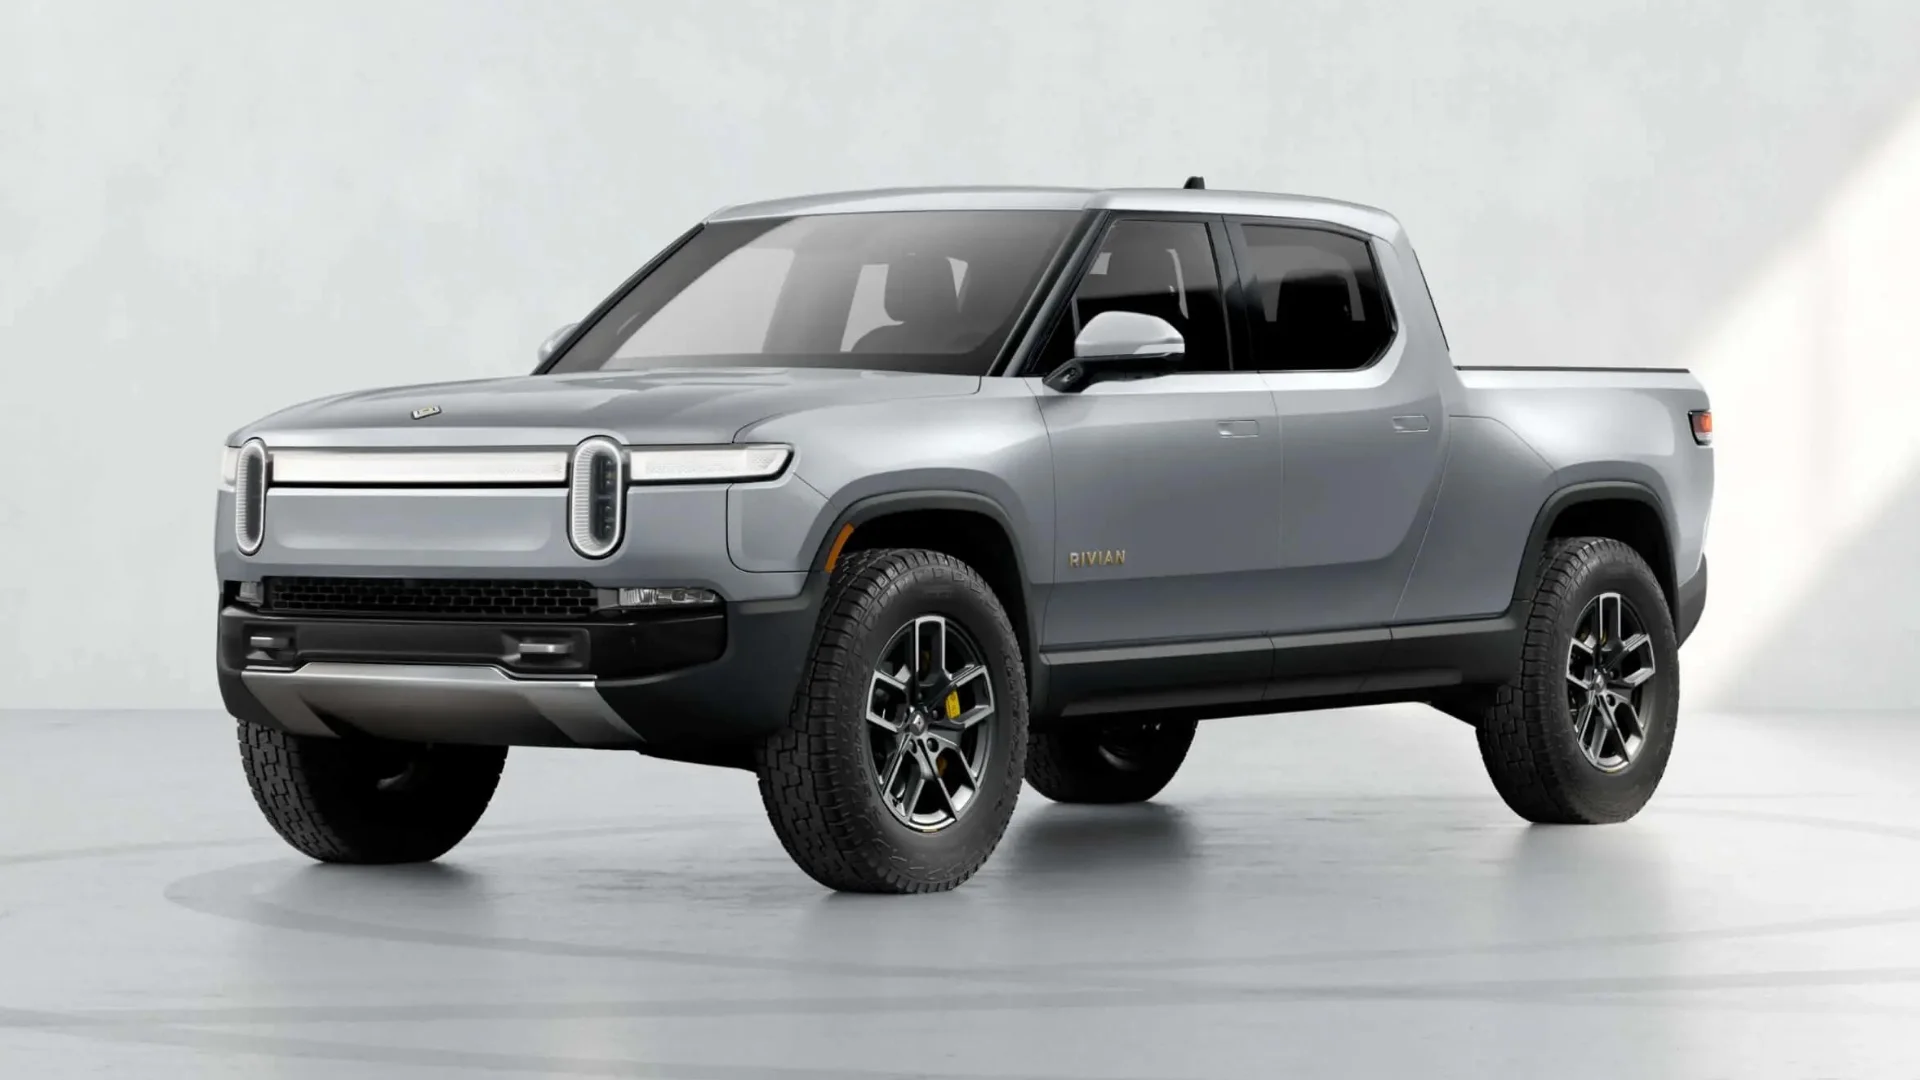 https://e-vehicleinfo.com/rivian-r1t-price-specifications-and-highlights/